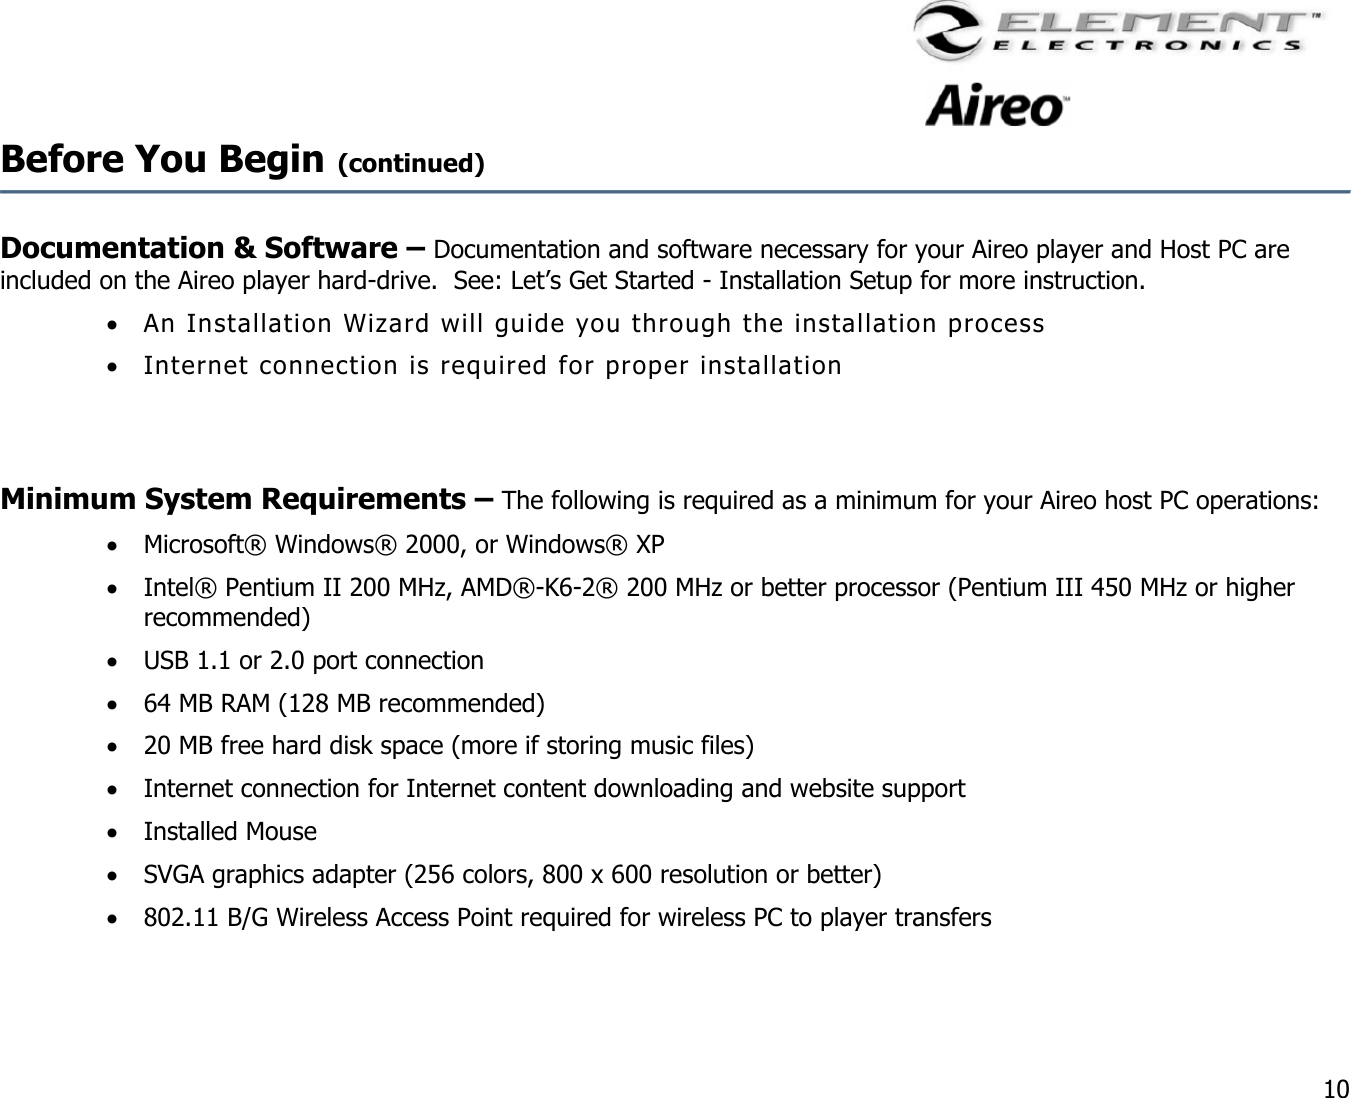                                                                                    10 Before You Begin (continued)    Documentation &amp; Software – Documentation and software necessary for your Aireo player and Host PC are included on the Aireo player hard-drive.  See: Let’s Get Started - Installation Setup for more instruction.   •  An Installation Wizard will guide you through the installation process  •  Internet connection is required for proper installation   Minimum System Requirements – The following is required as a minimum for your Aireo host PC operations: •  Microsoft® Windows® 2000, or Windows® XP •  Intel® Pentium II 200 MHz, AMD®-K6-2® 200 MHz or better processor (Pentium III 450 MHz or higher recommended) •  USB 1.1 or 2.0 port connection •  64 MB RAM (128 MB recommended) •  20 MB free hard disk space (more if storing music files) •  Internet connection for Internet content downloading and website support •  Installed Mouse •  SVGA graphics adapter (256 colors, 800 x 600 resolution or better) •  802.11 B/G Wireless Access Point required for wireless PC to player transfers  